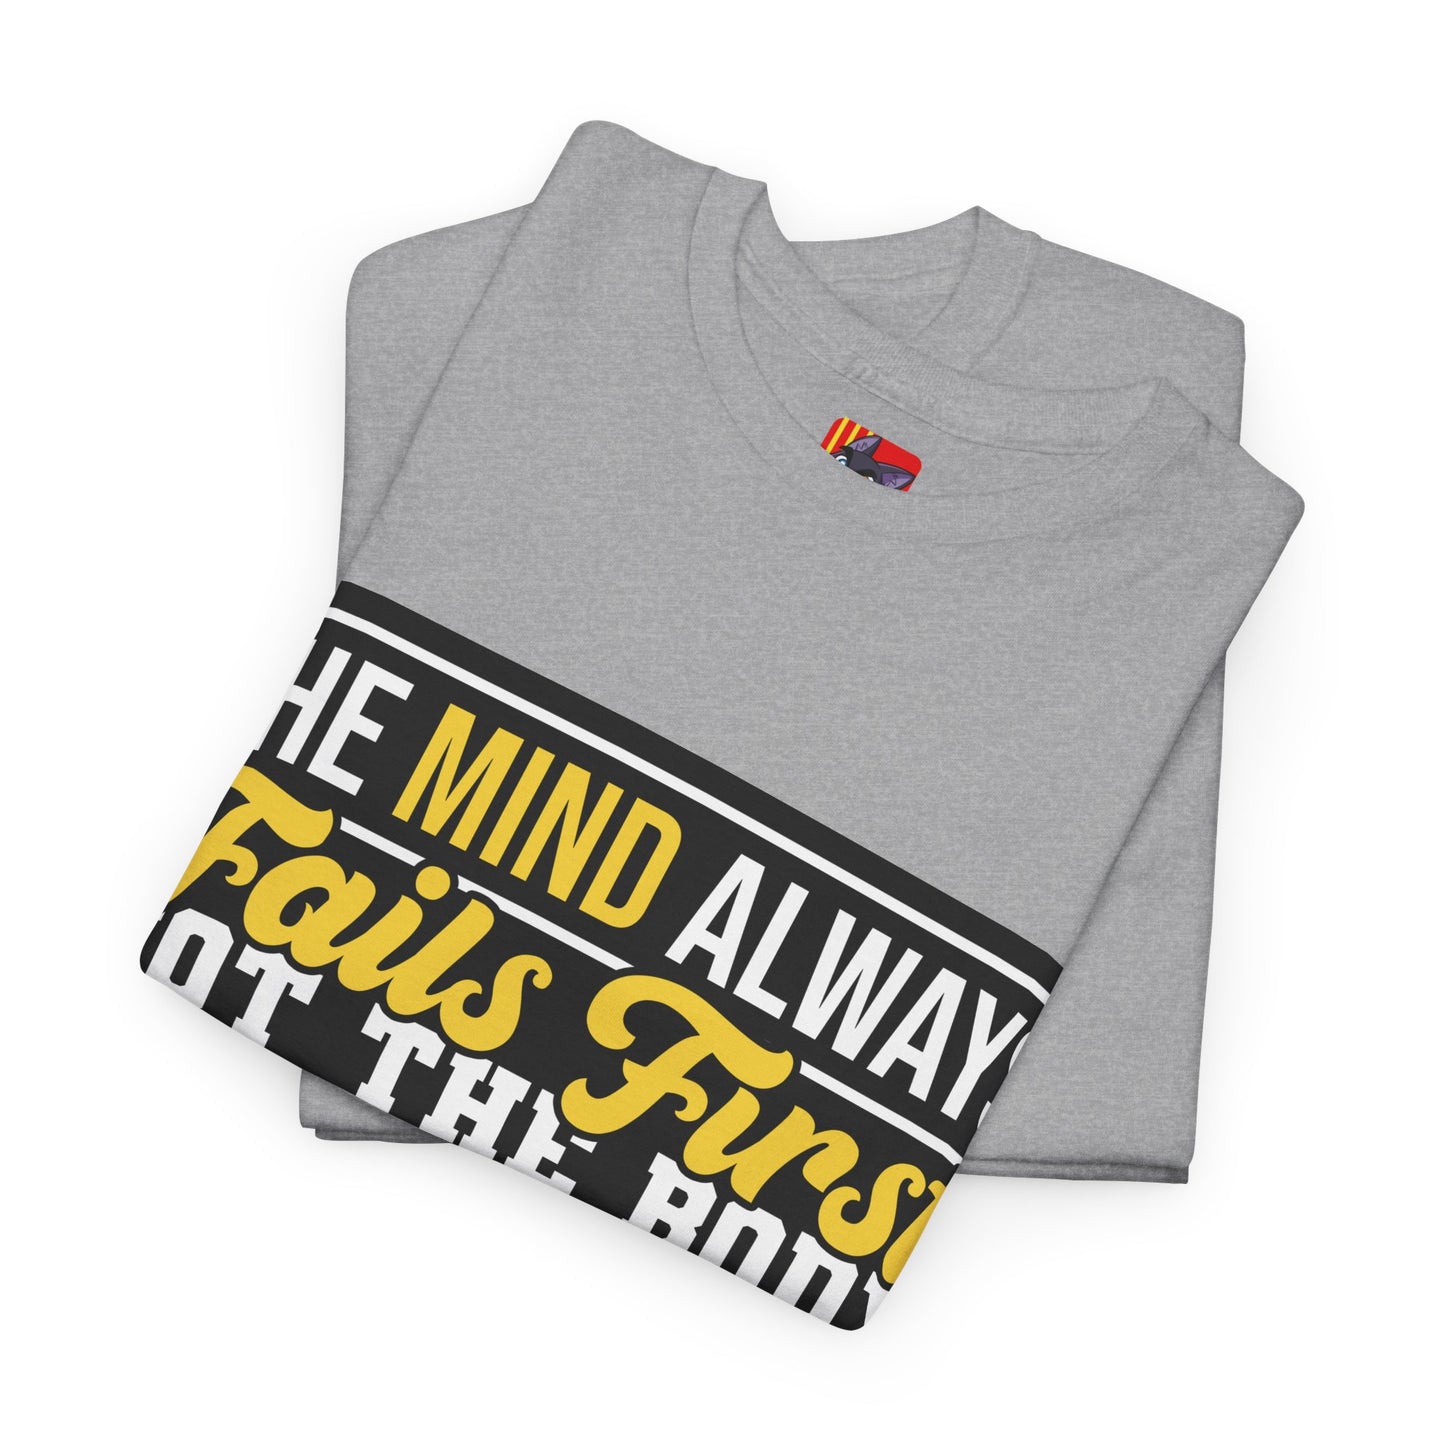 The Positive Mindset T-Shirt: I will always stay hungry never satisfied Arnold Schwarzenegger